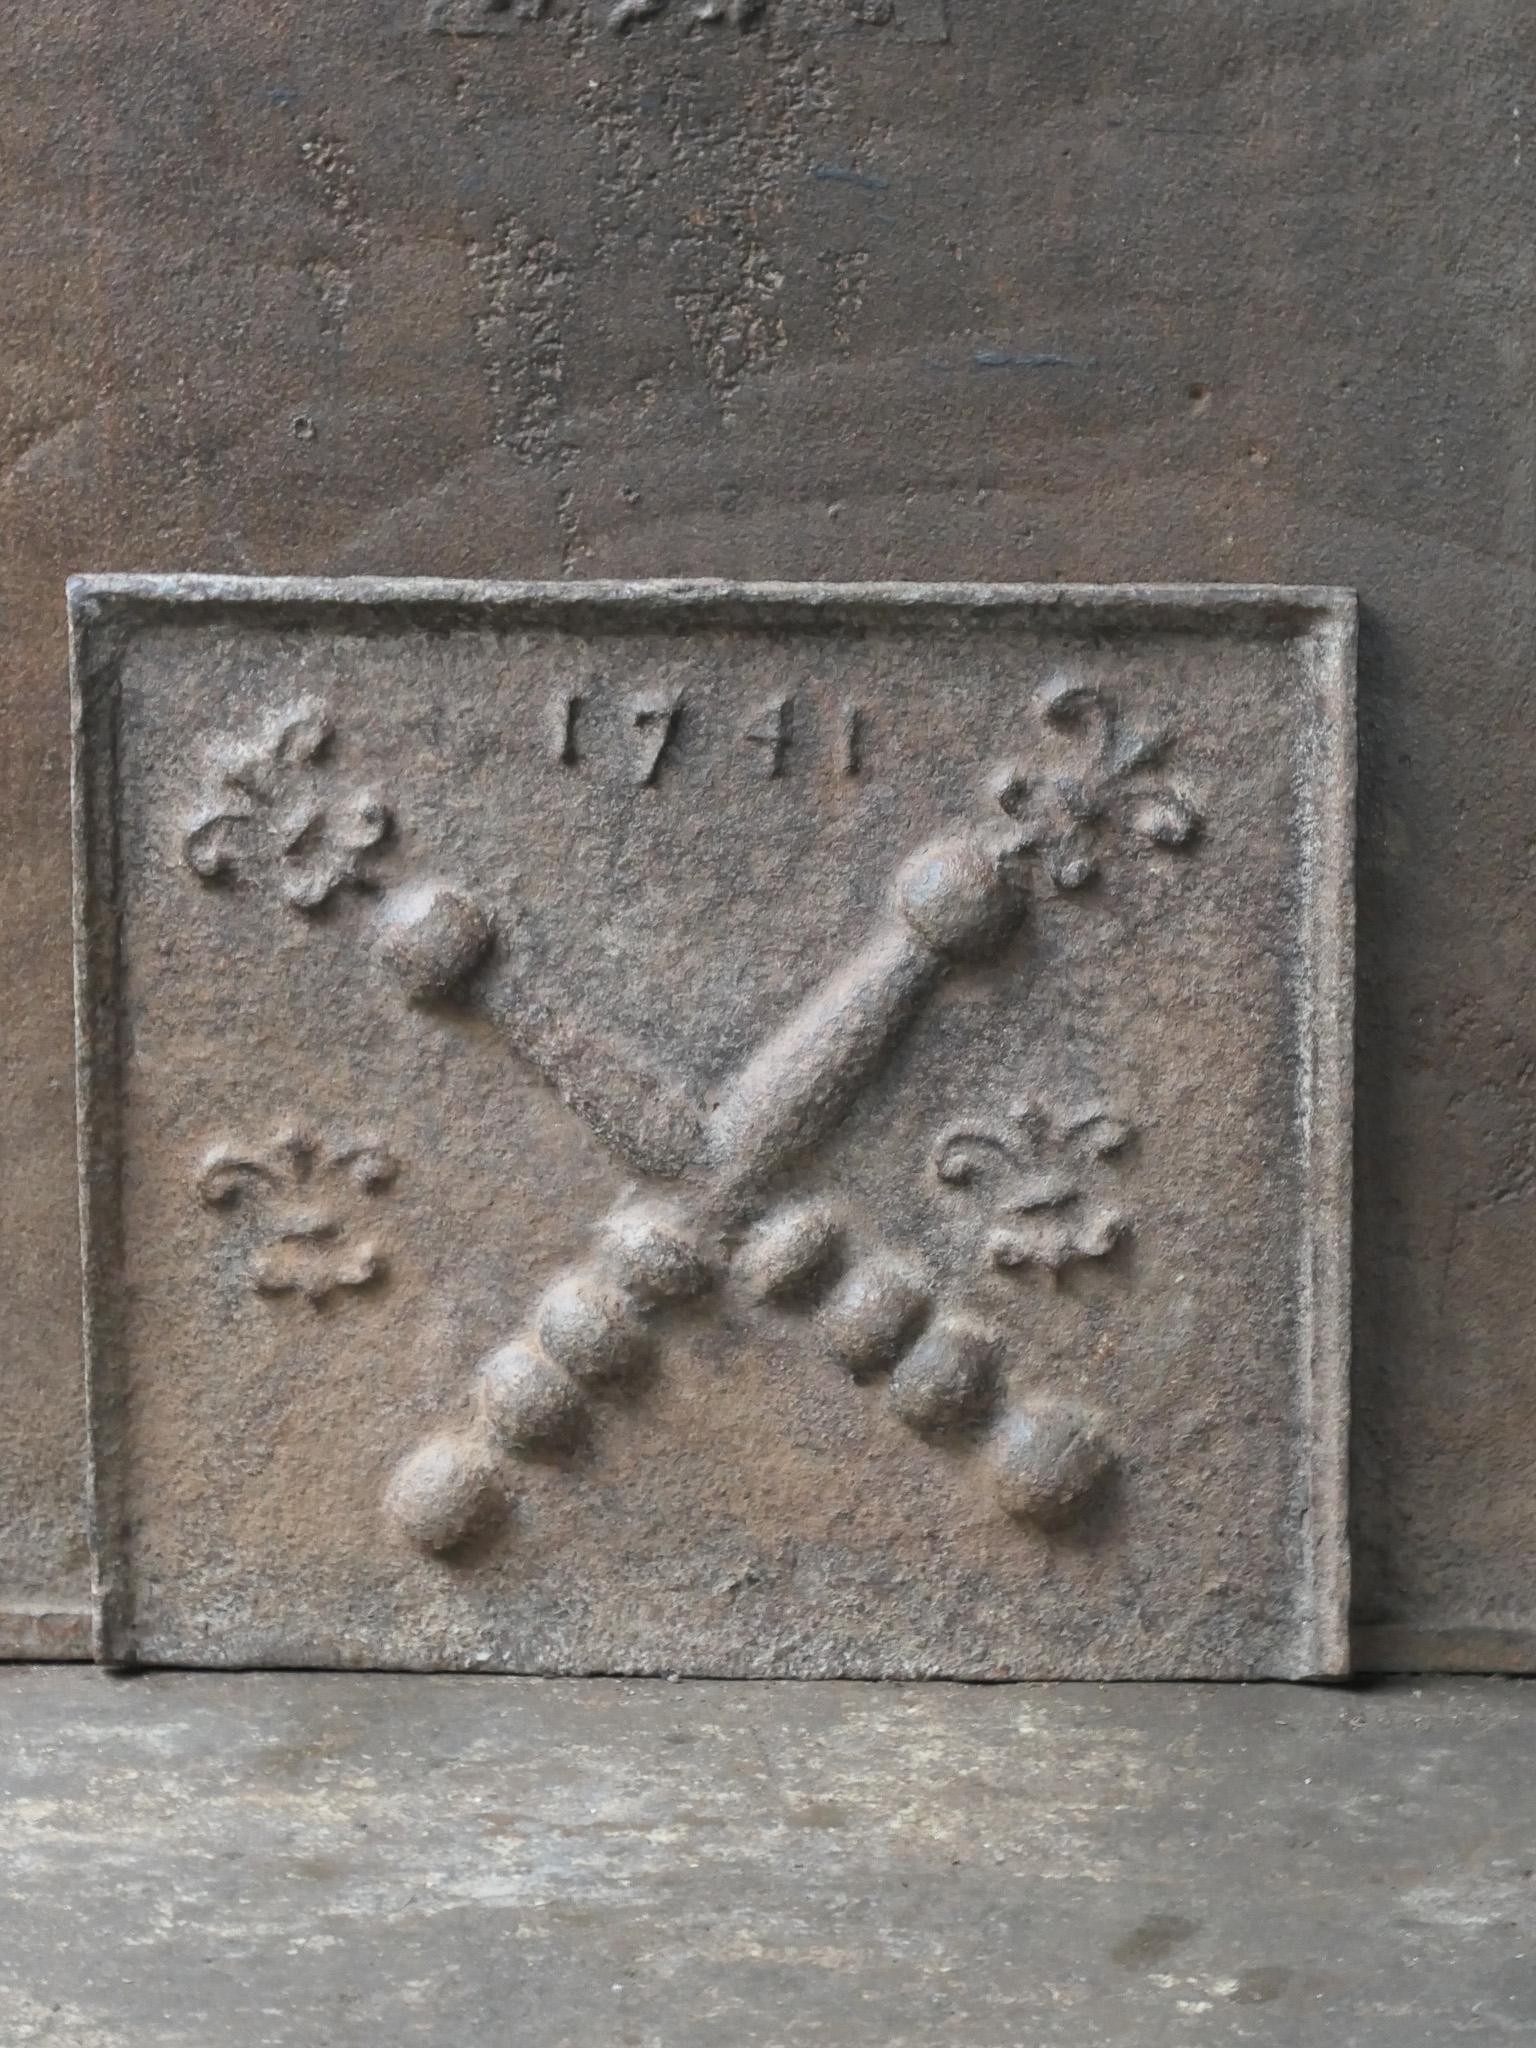 18th century French fireback with a Saint Andrew's cross and two pillars of Hercules. Saint Andrew is said to have been martyred on a cross in this shape. As a result the cross became a sign for humility and sacrifice. The pillars of Hercules